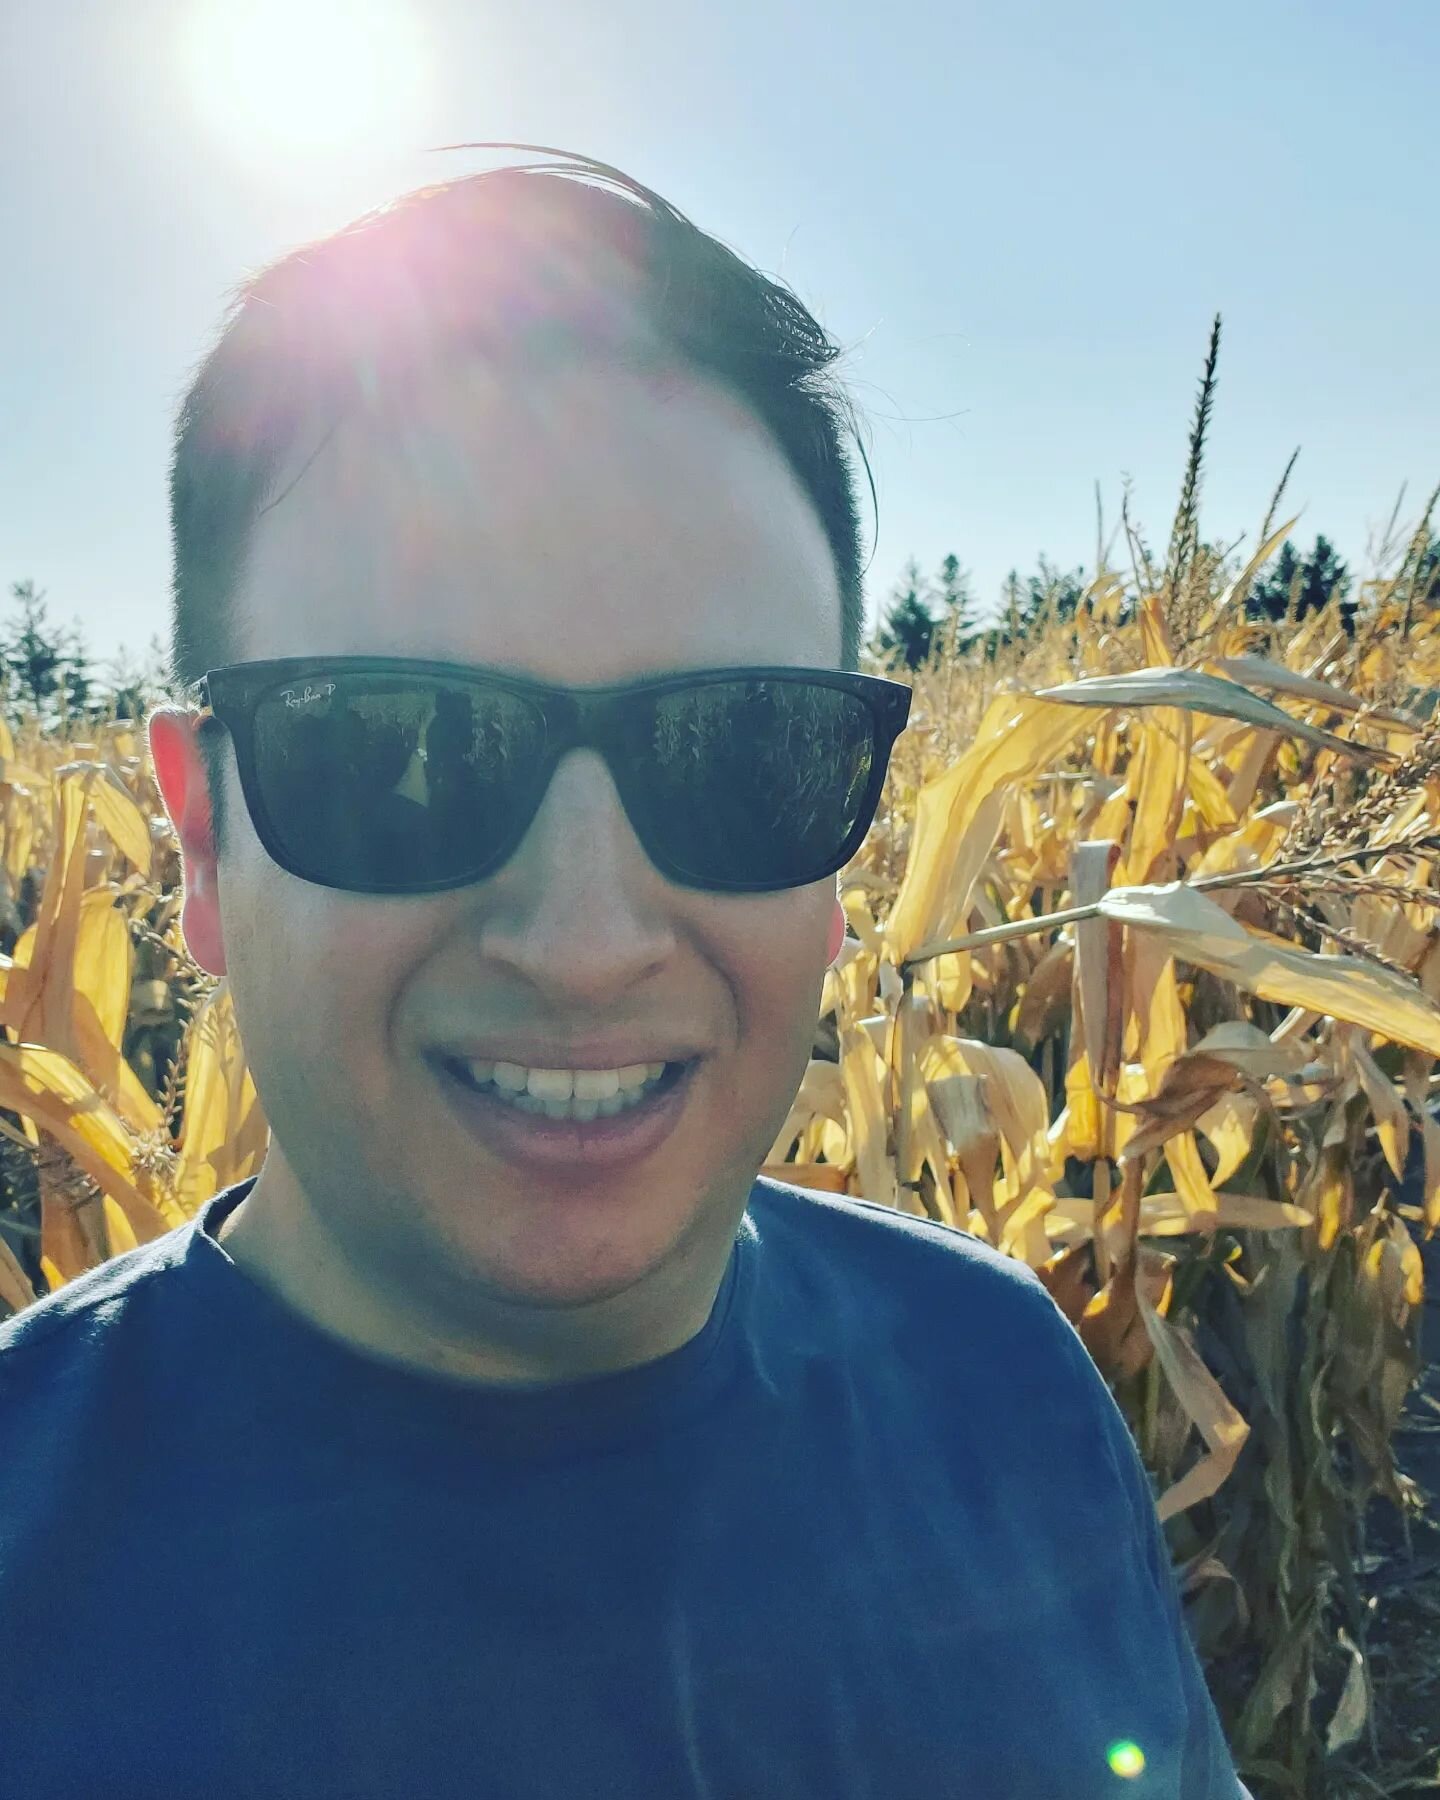 Hope you're having the beat fall weekend ever! 

Btw, next available appts are on Monday! See you then!

#weekend #happy #smile #fall #autumn #pumpkin #pumpkin patch #instagay #gaytoronto #toronto #the6ix #nature #selfcare